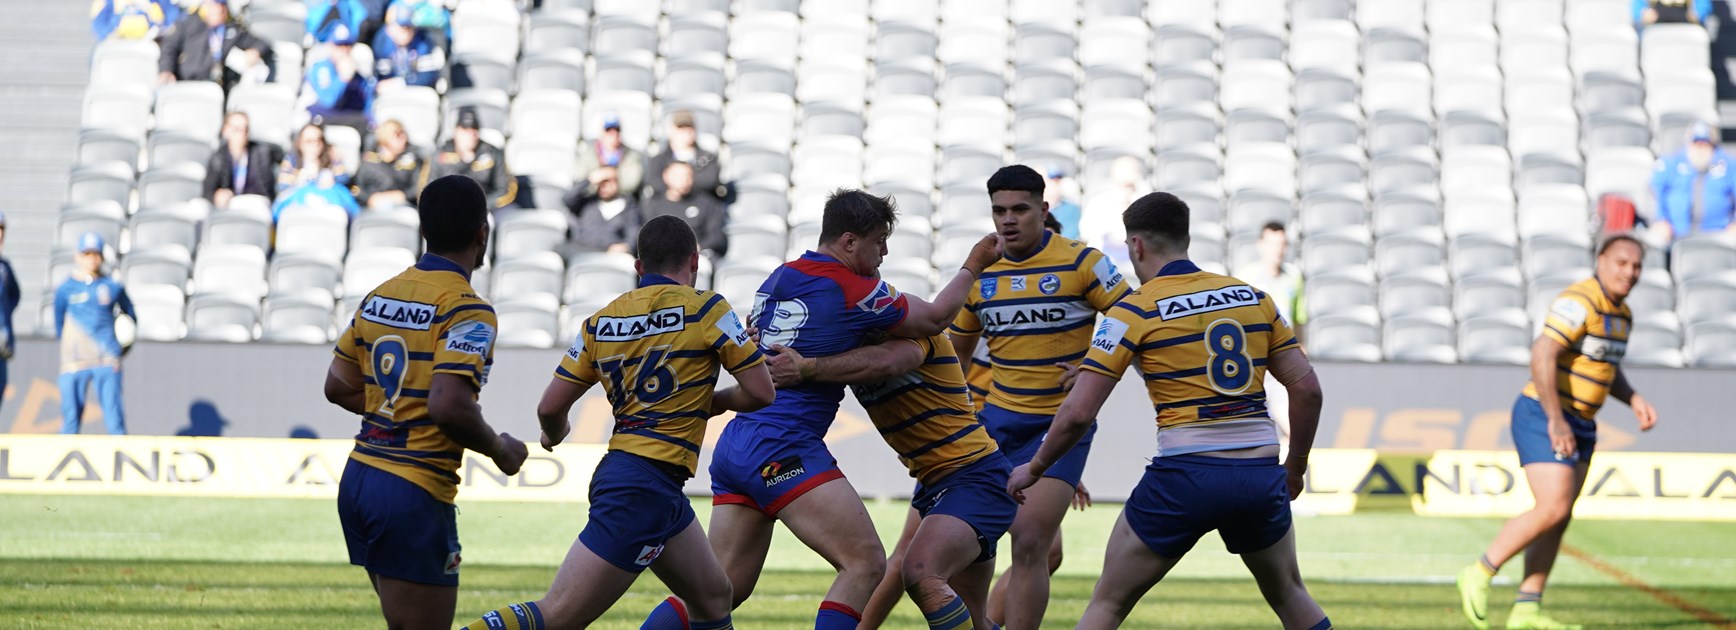 Knights 20s fall short to Eels